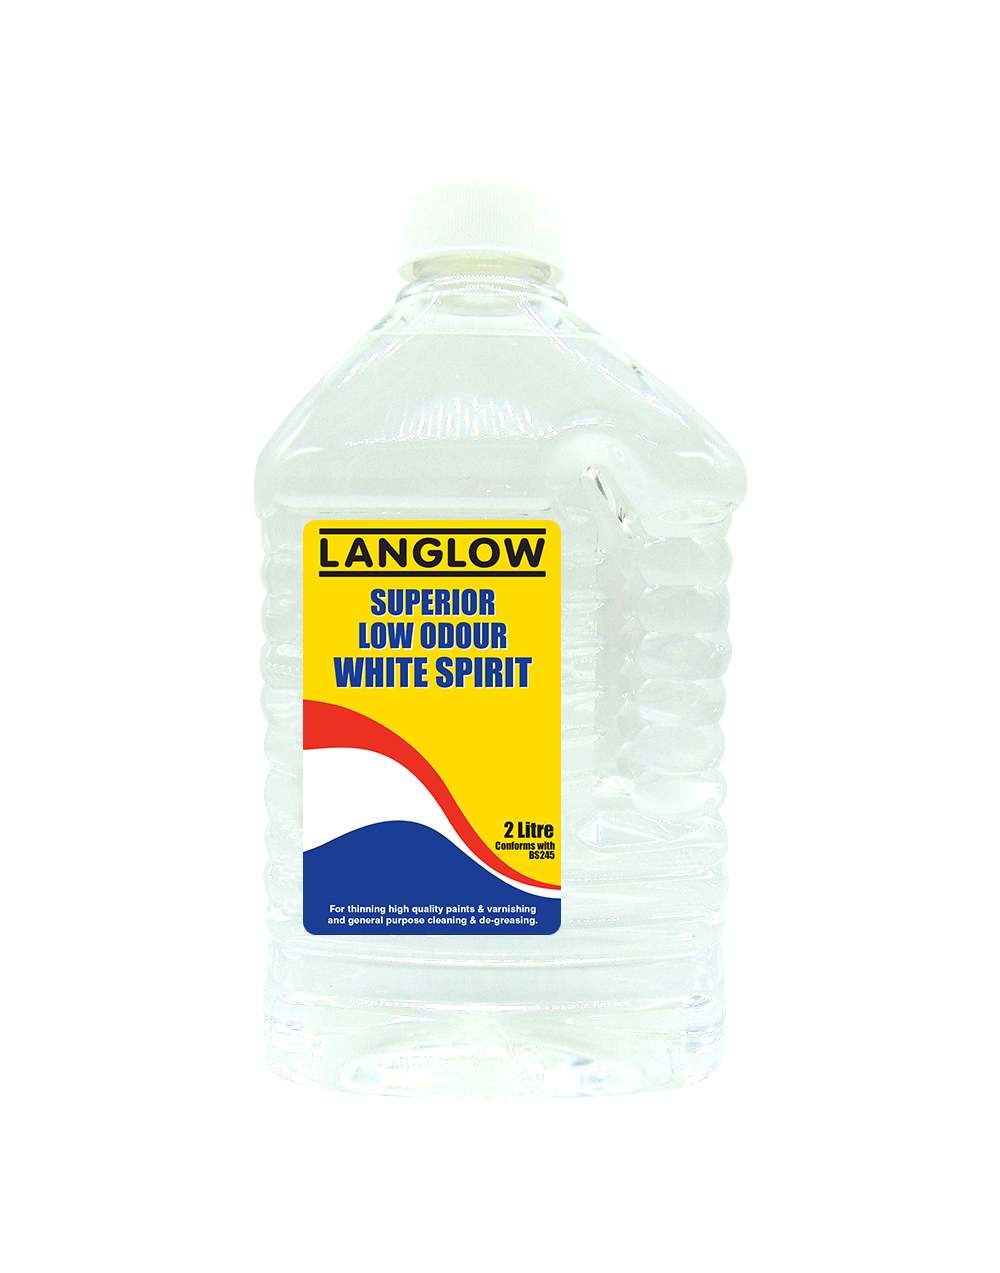 Low odour white spirit - Palace Chemicals